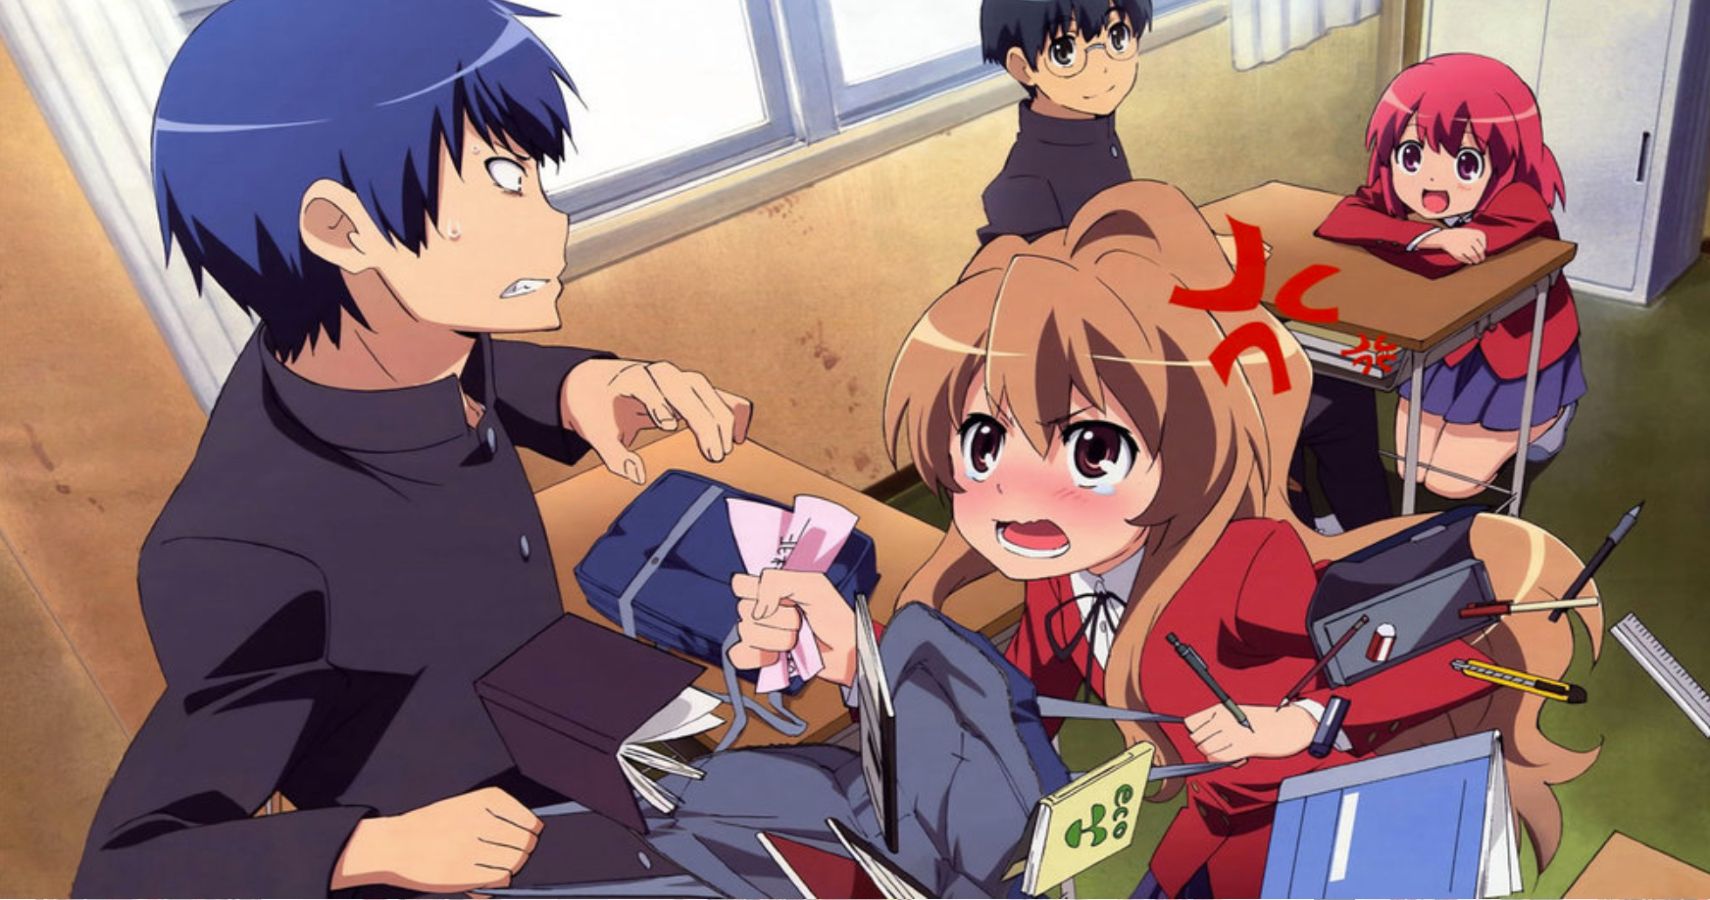 Toradora Celebrates 15th Anniversary With Special Trailer, Comments